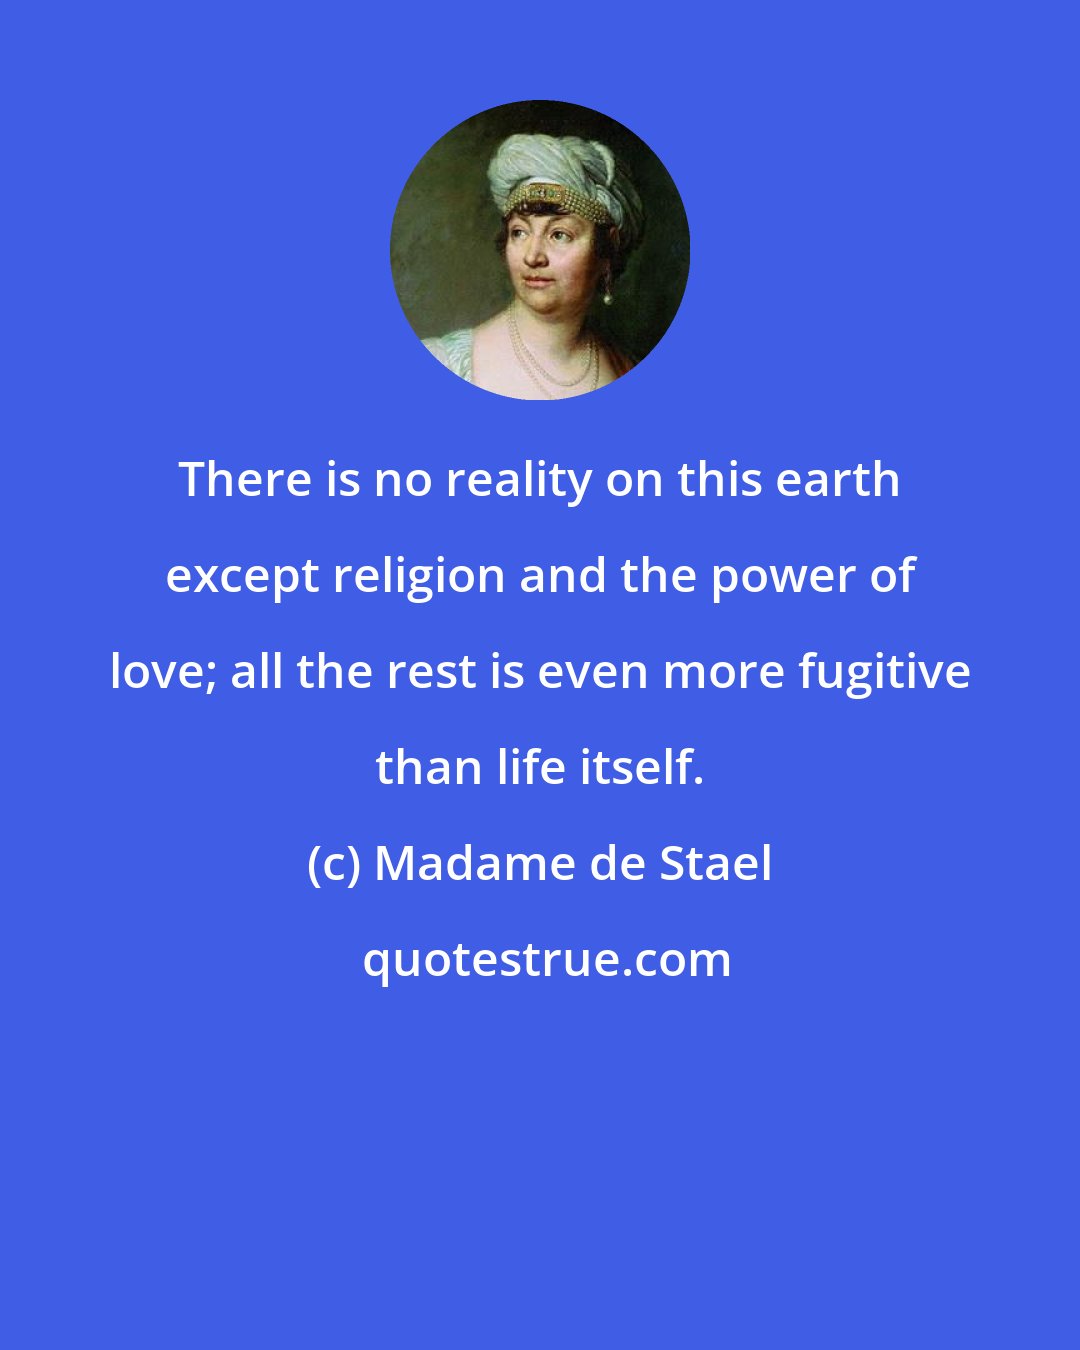 Madame de Stael: There is no reality on this earth except religion and the power of love; all the rest is even more fugitive than life itself.